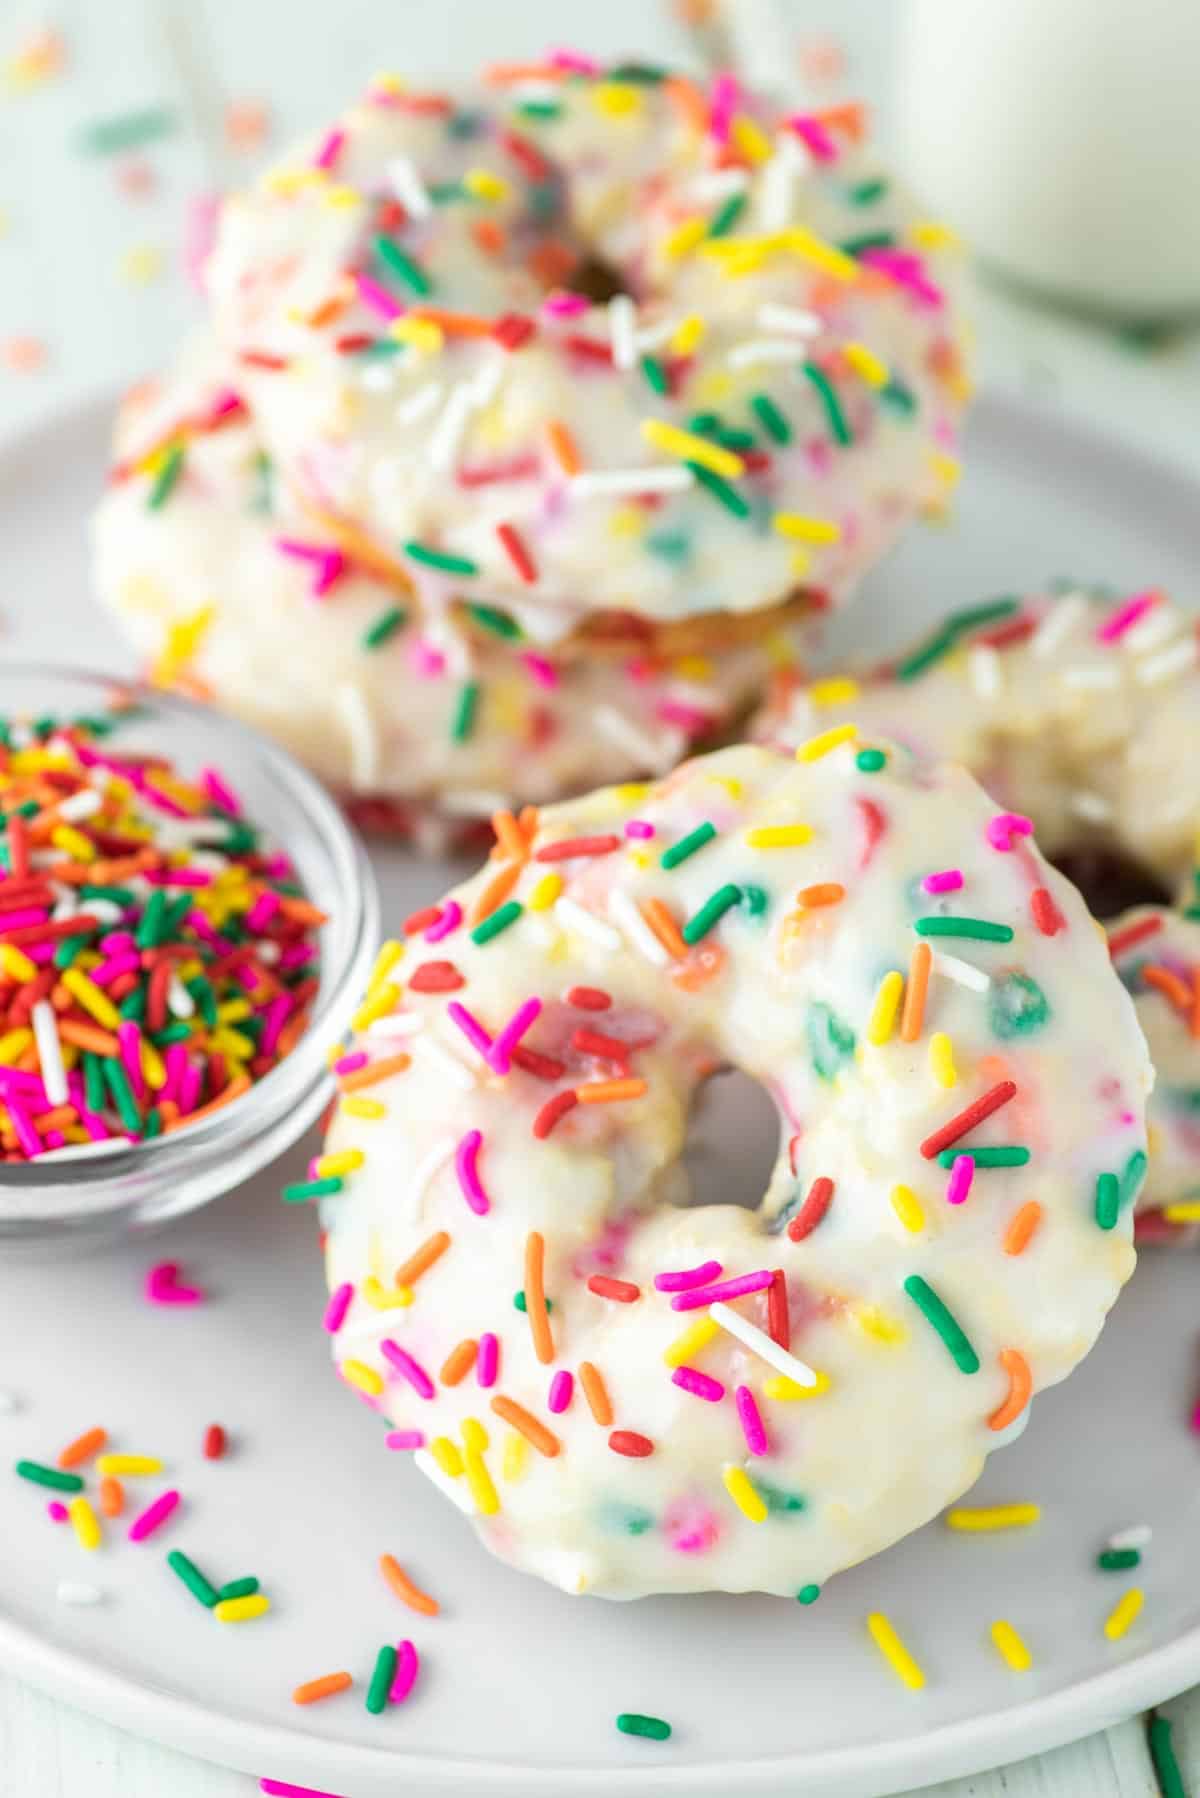 baked vanilla donuts with sprinkles on white plate